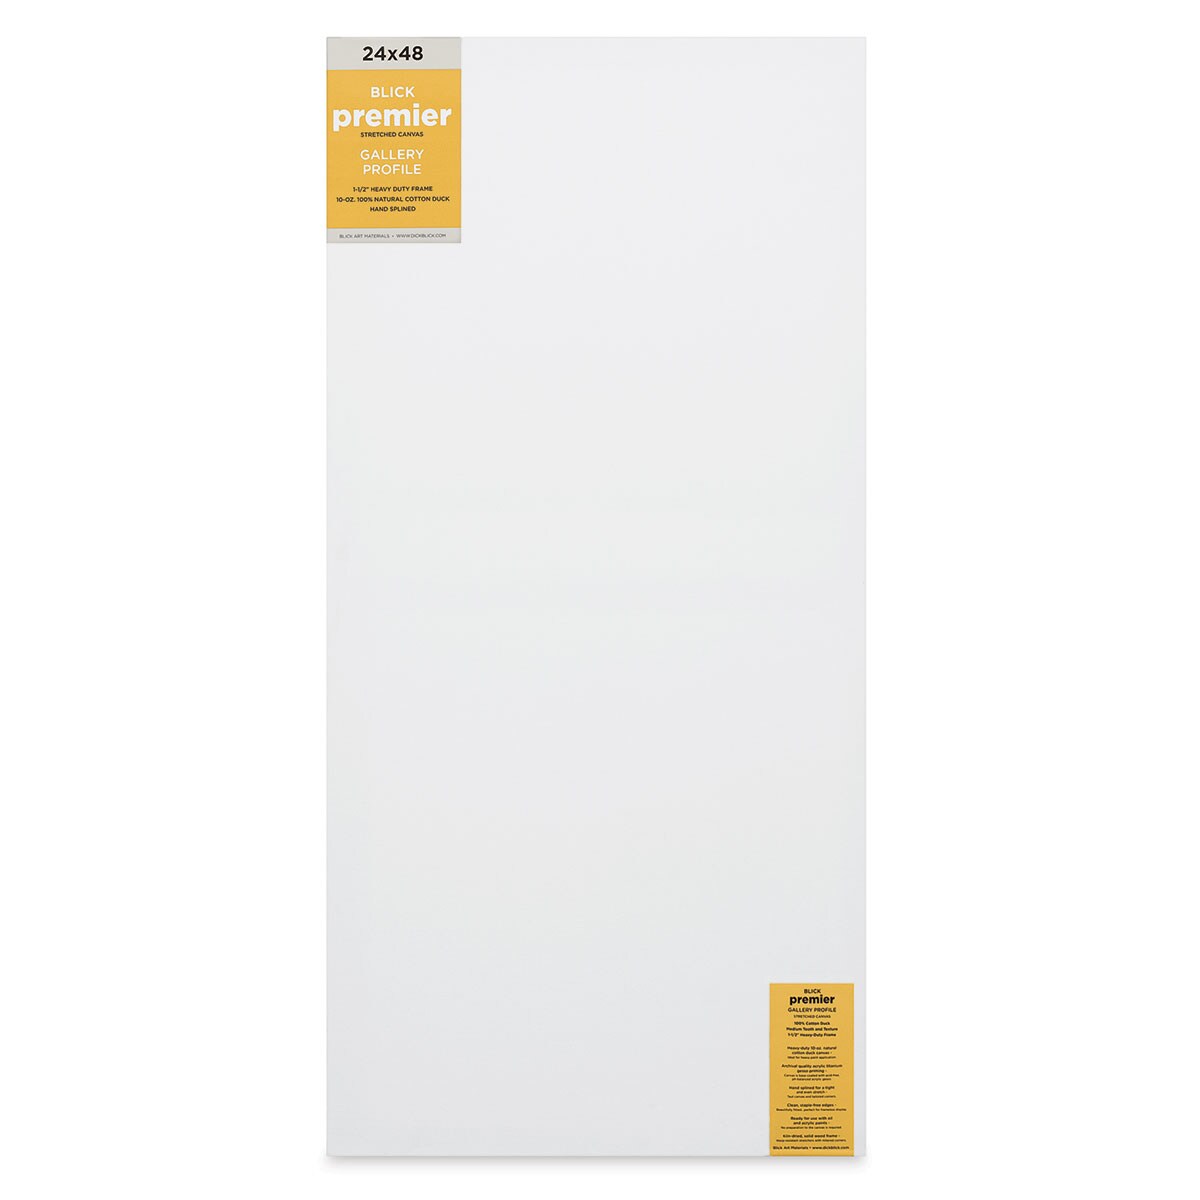 300 Series Stretched Canvas - Strathmore Artist Papers